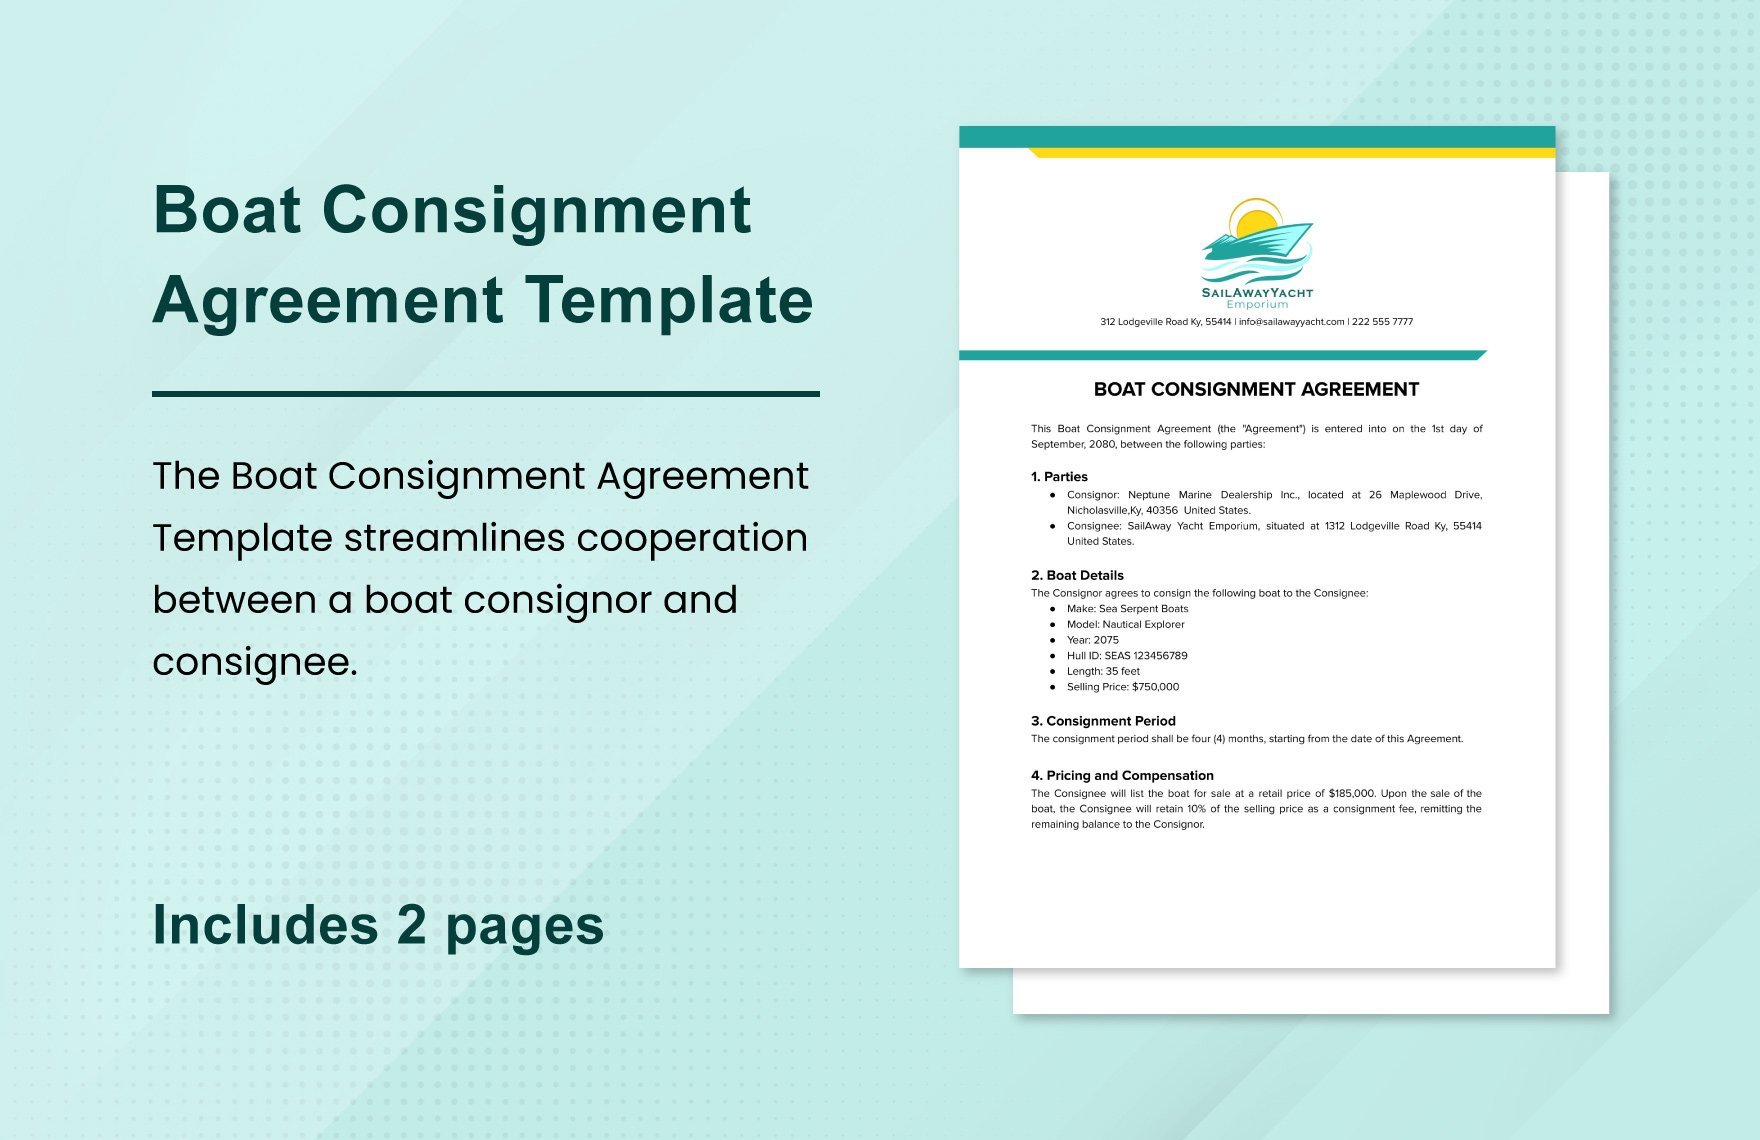 Boat Consignment Agreement Template